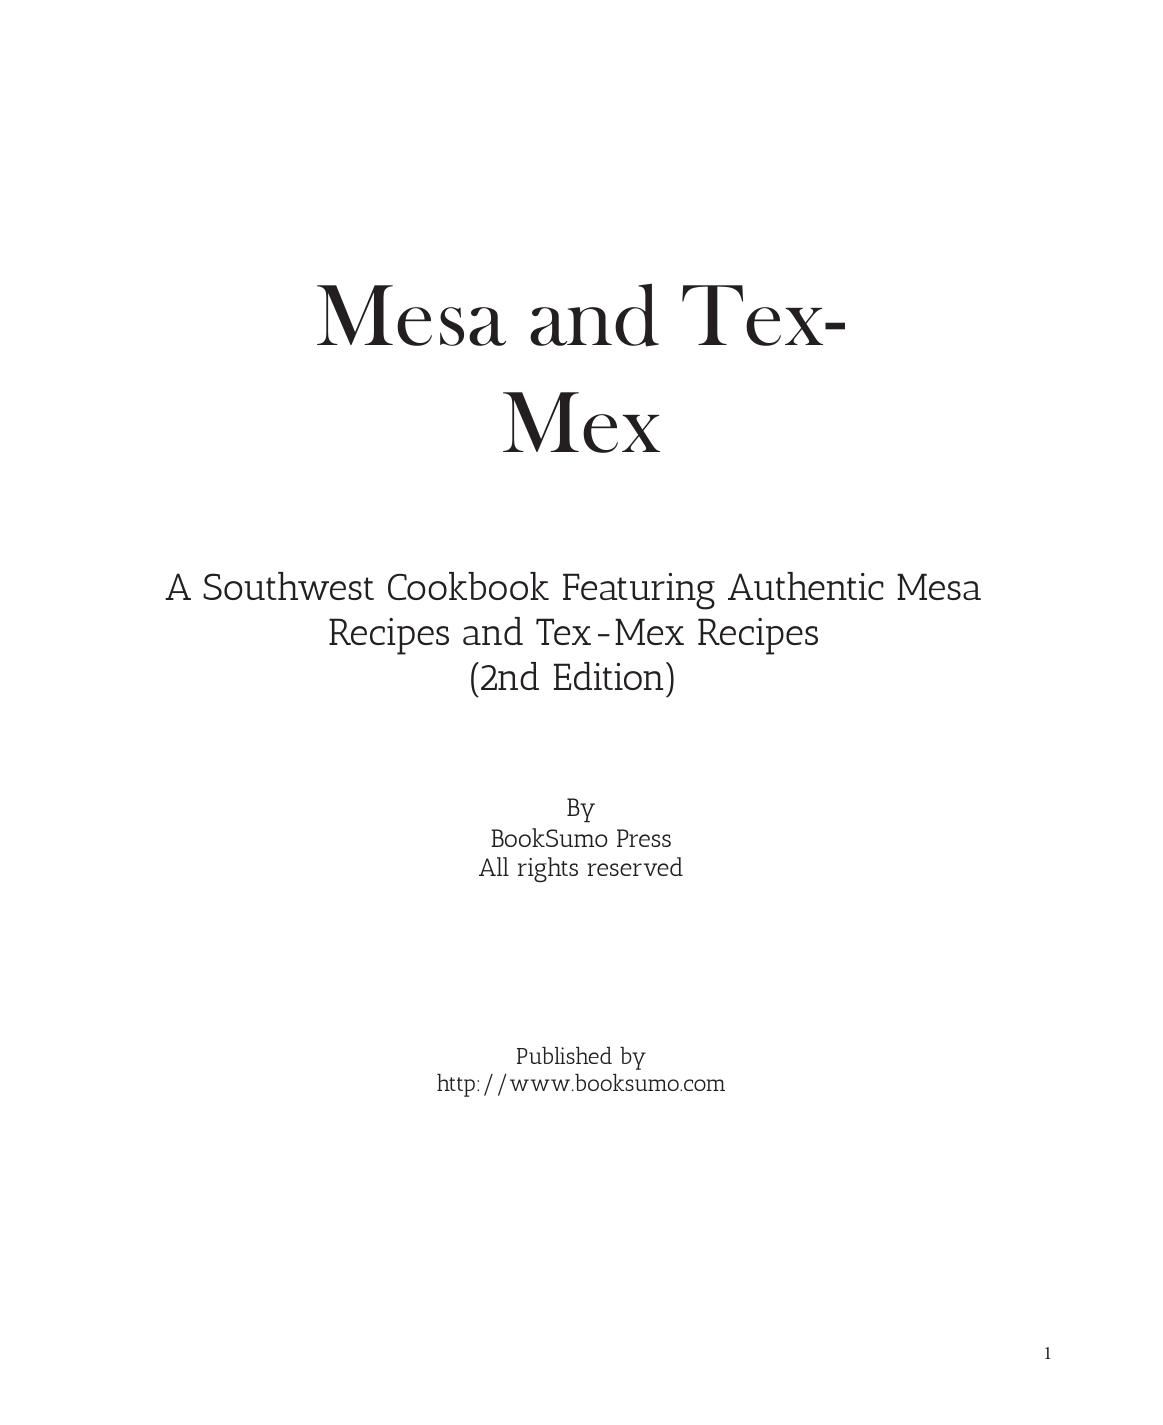 Mesa and Tex-Mex: A Southwest Cookbook Featuring Authentic Mesa and Mexican Recipes by BookSumo Press